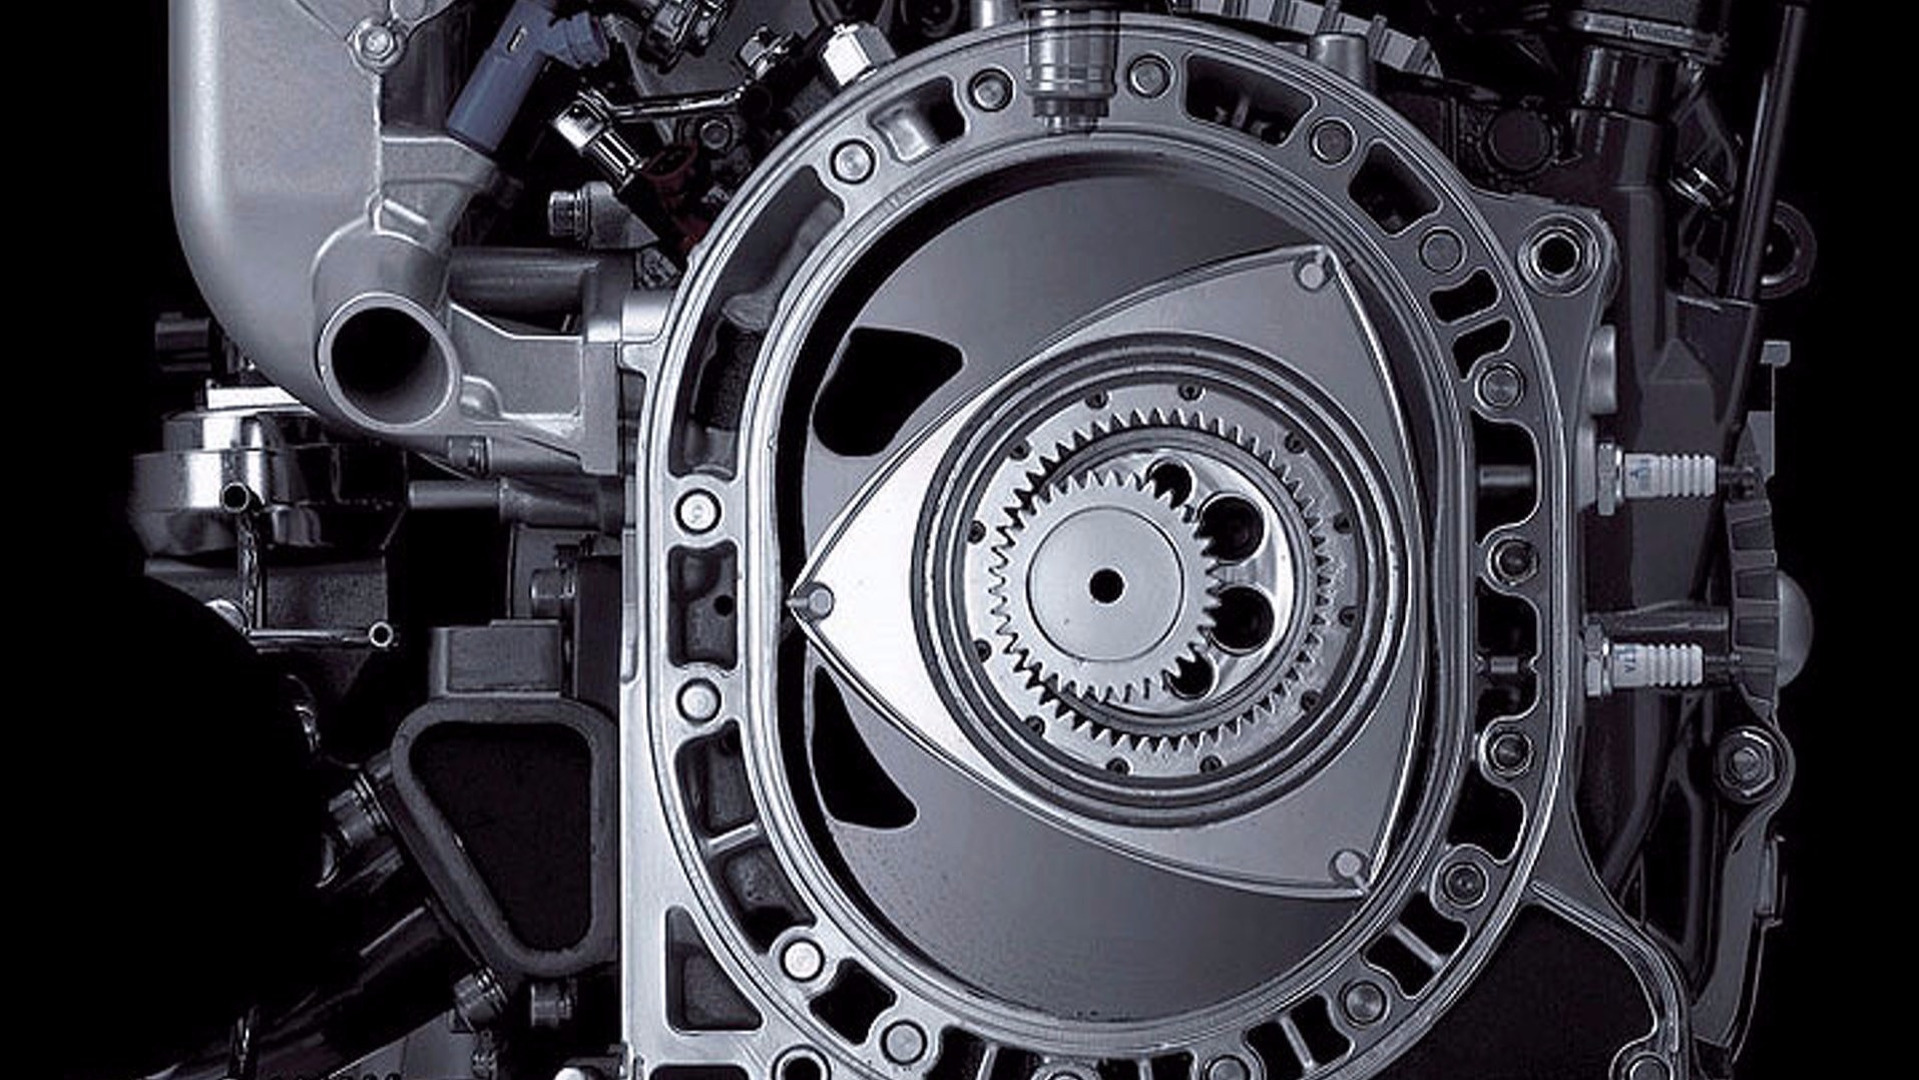 Mazda Officially Confirms The Return Of The Rotary Engine In 2019